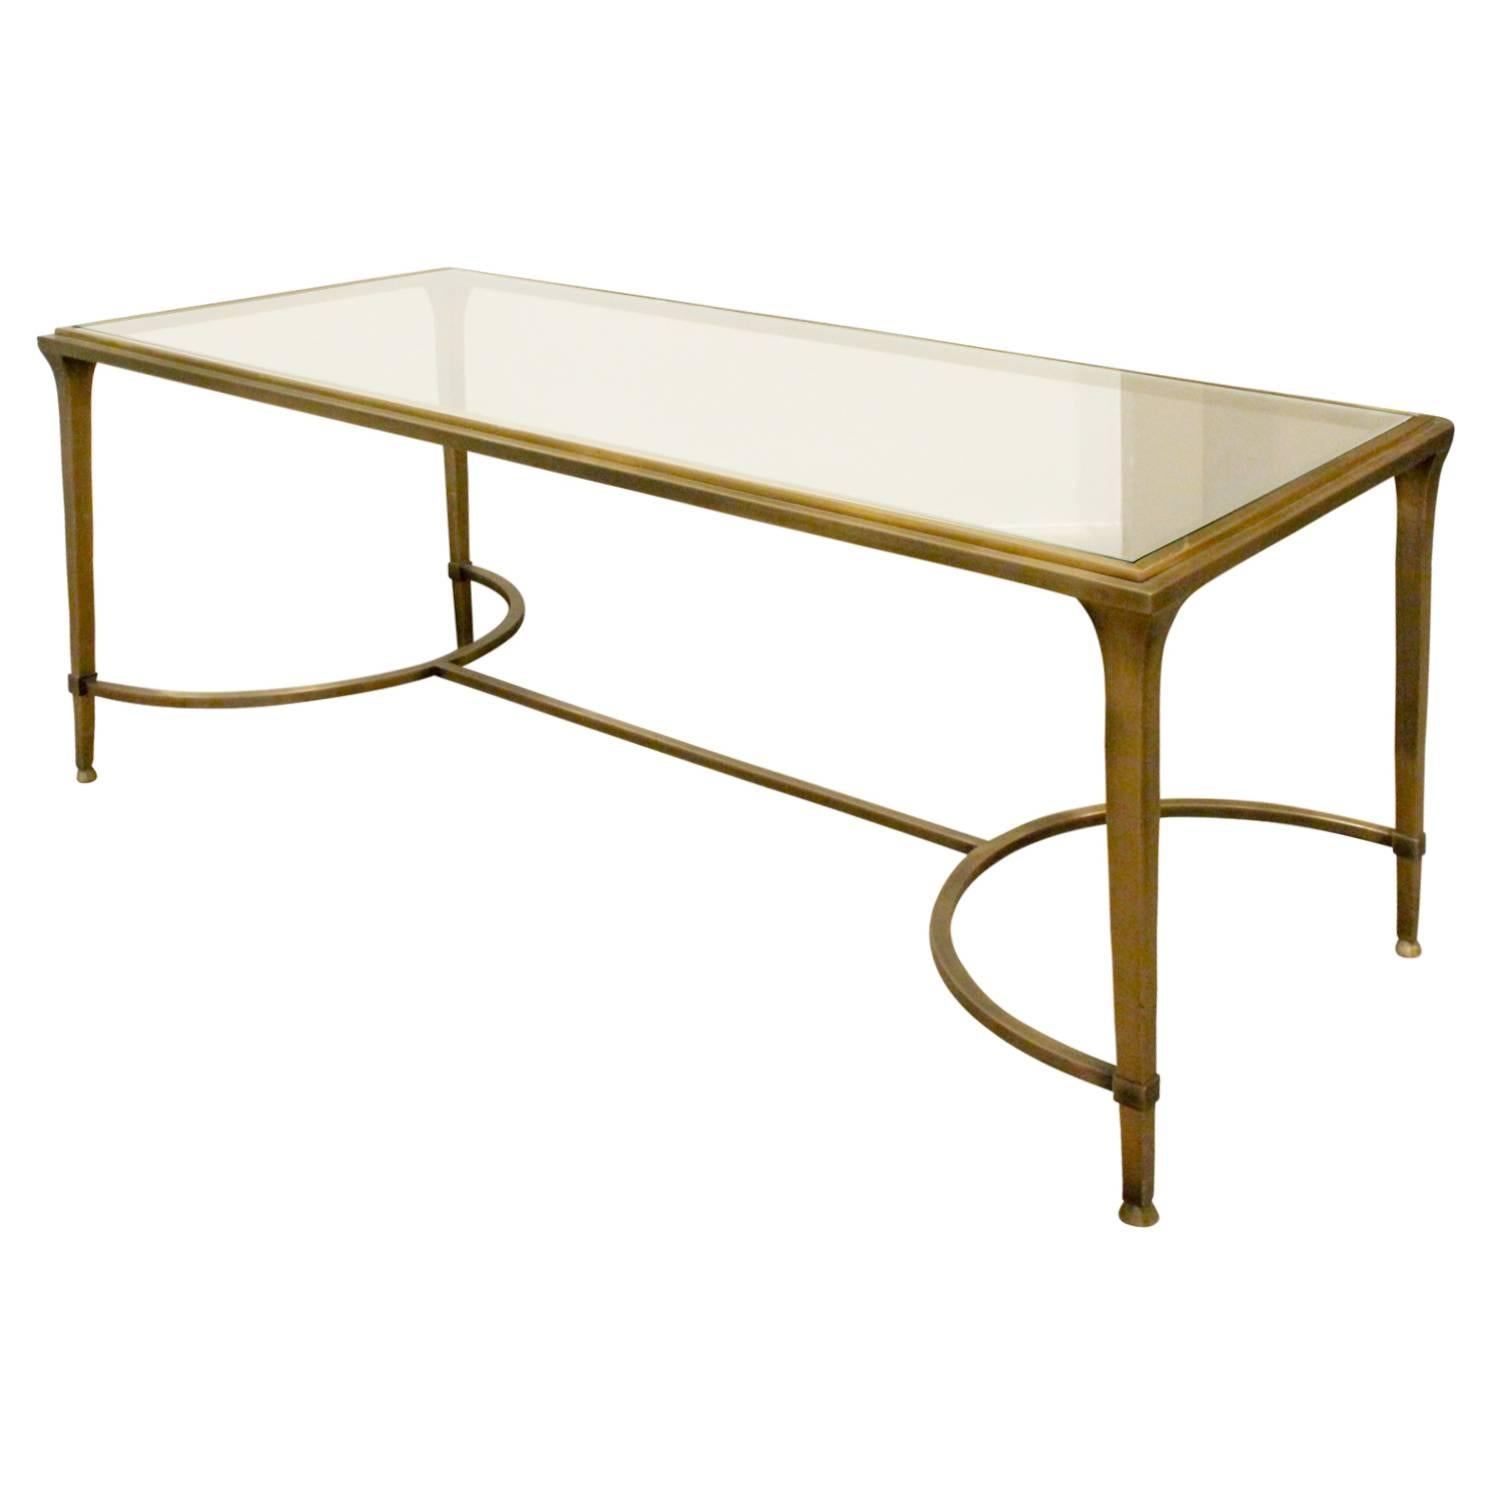 Coffee table in satin bronze with polished bronze accents and inset glass top, American, 1960s.